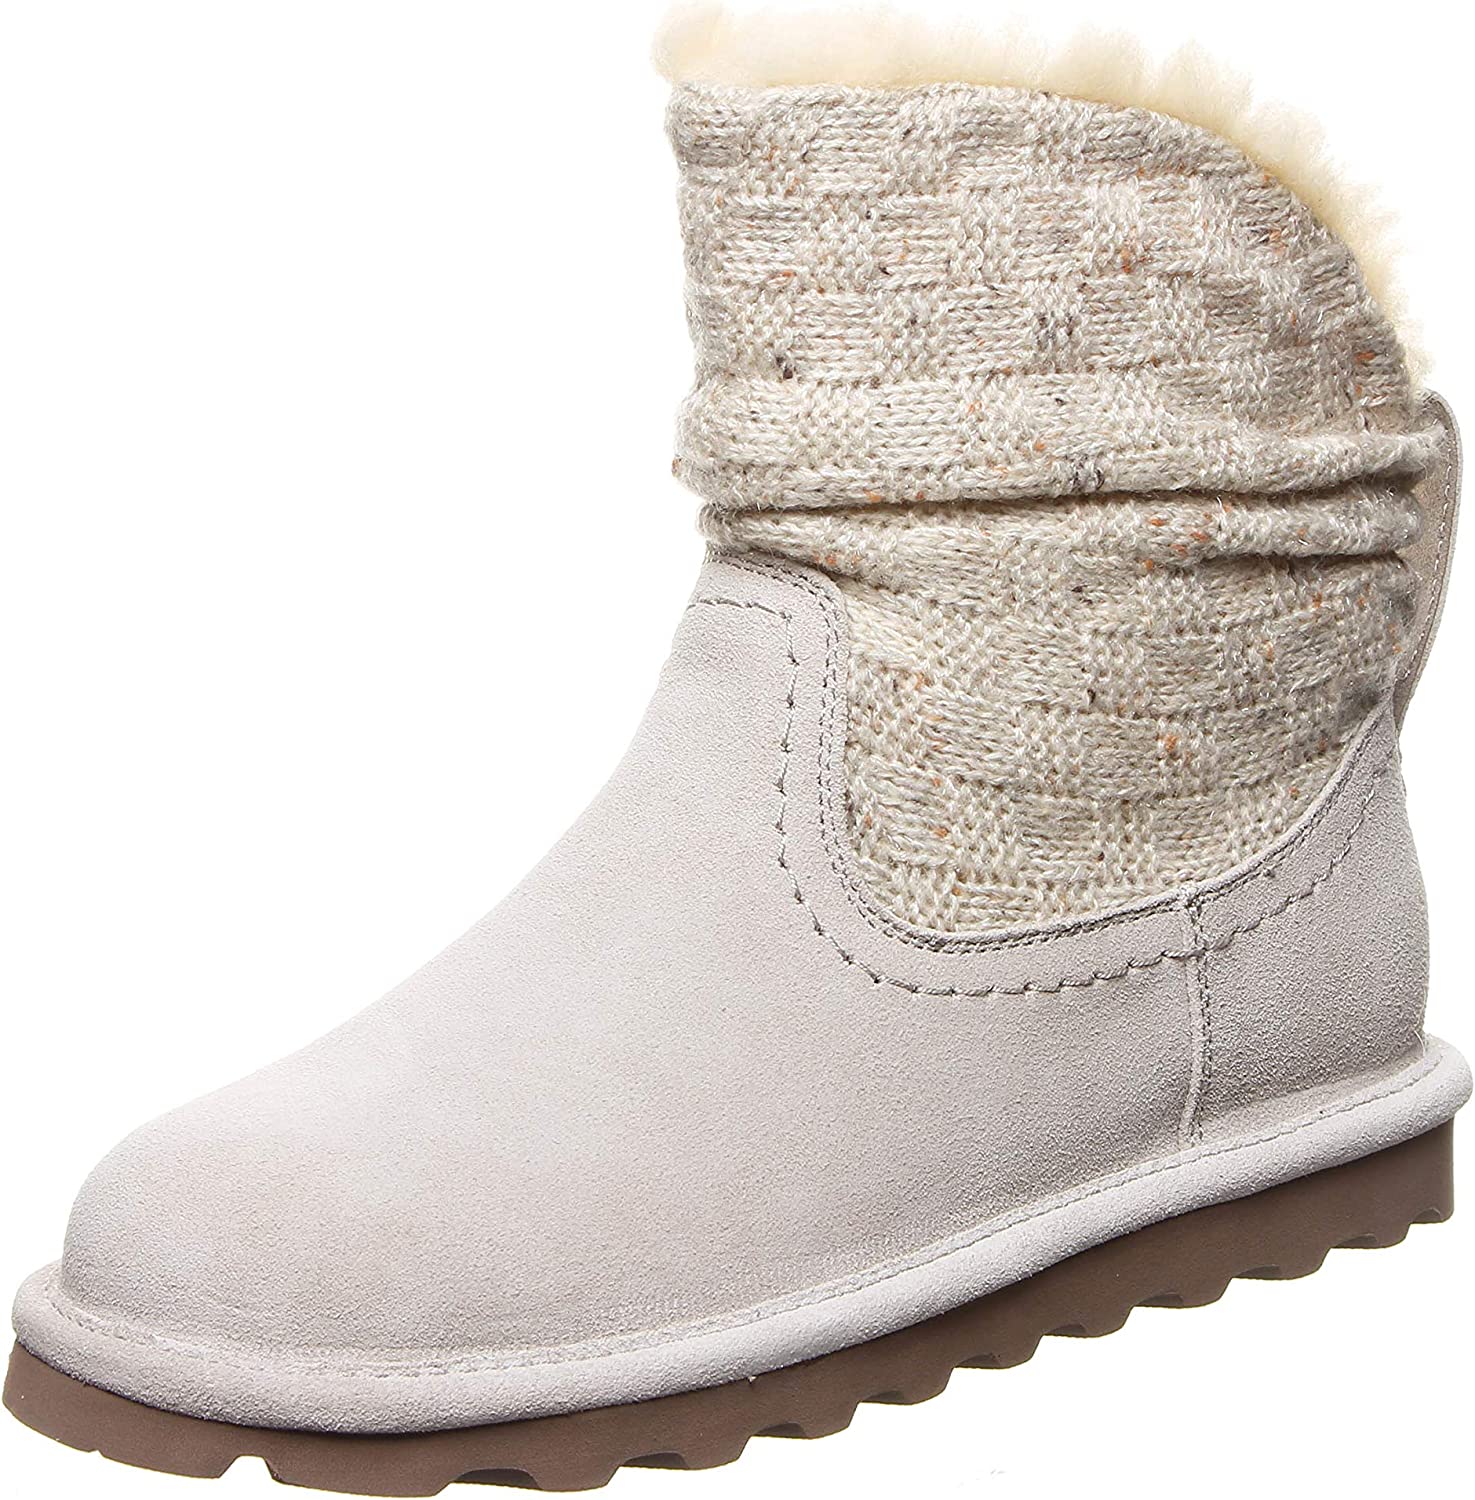 Bearpaw Womens Virginia Knitted Winter Boots - Winter White - 6